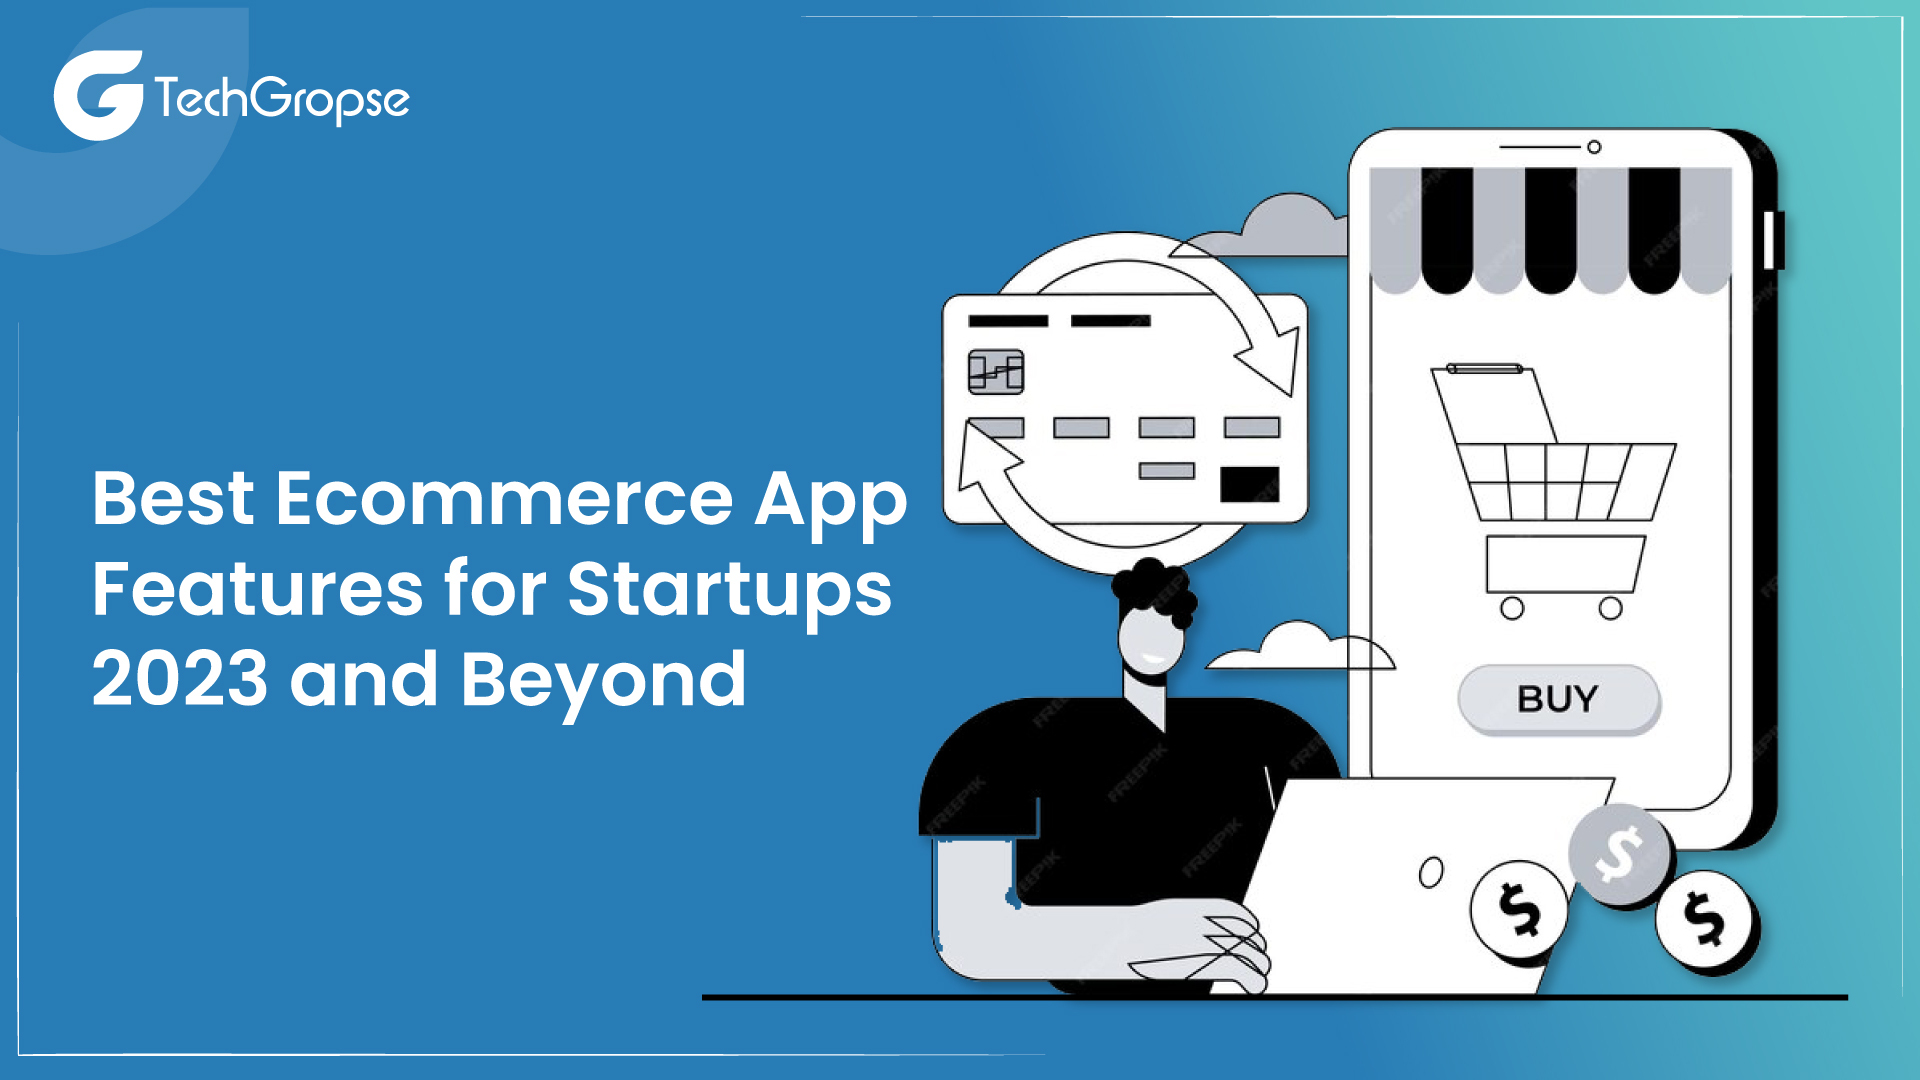 10 Best Ecommerce App Features for Startups 2023 and Beyond